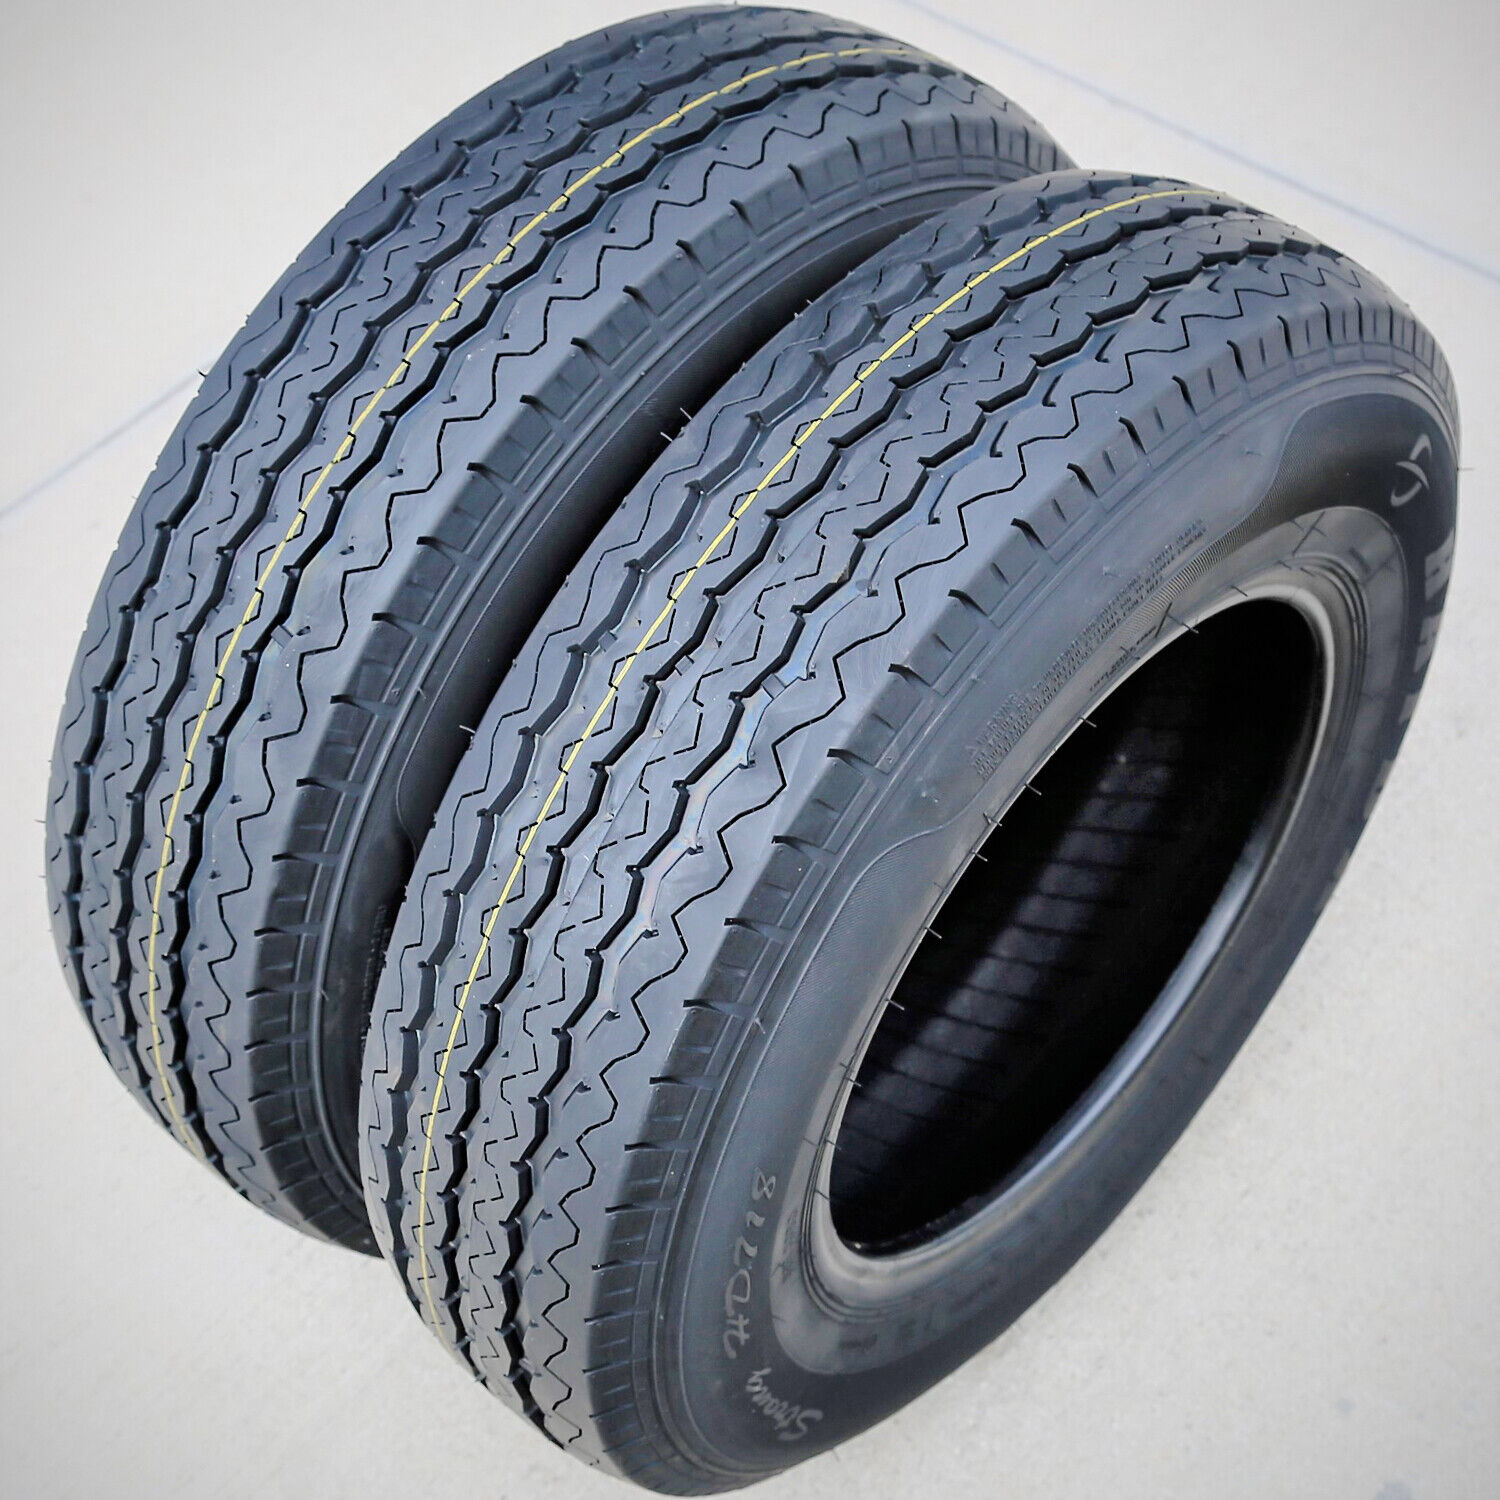 2 Tires Haida Strong HD718 185R14C Load D 8 Ply Commercial